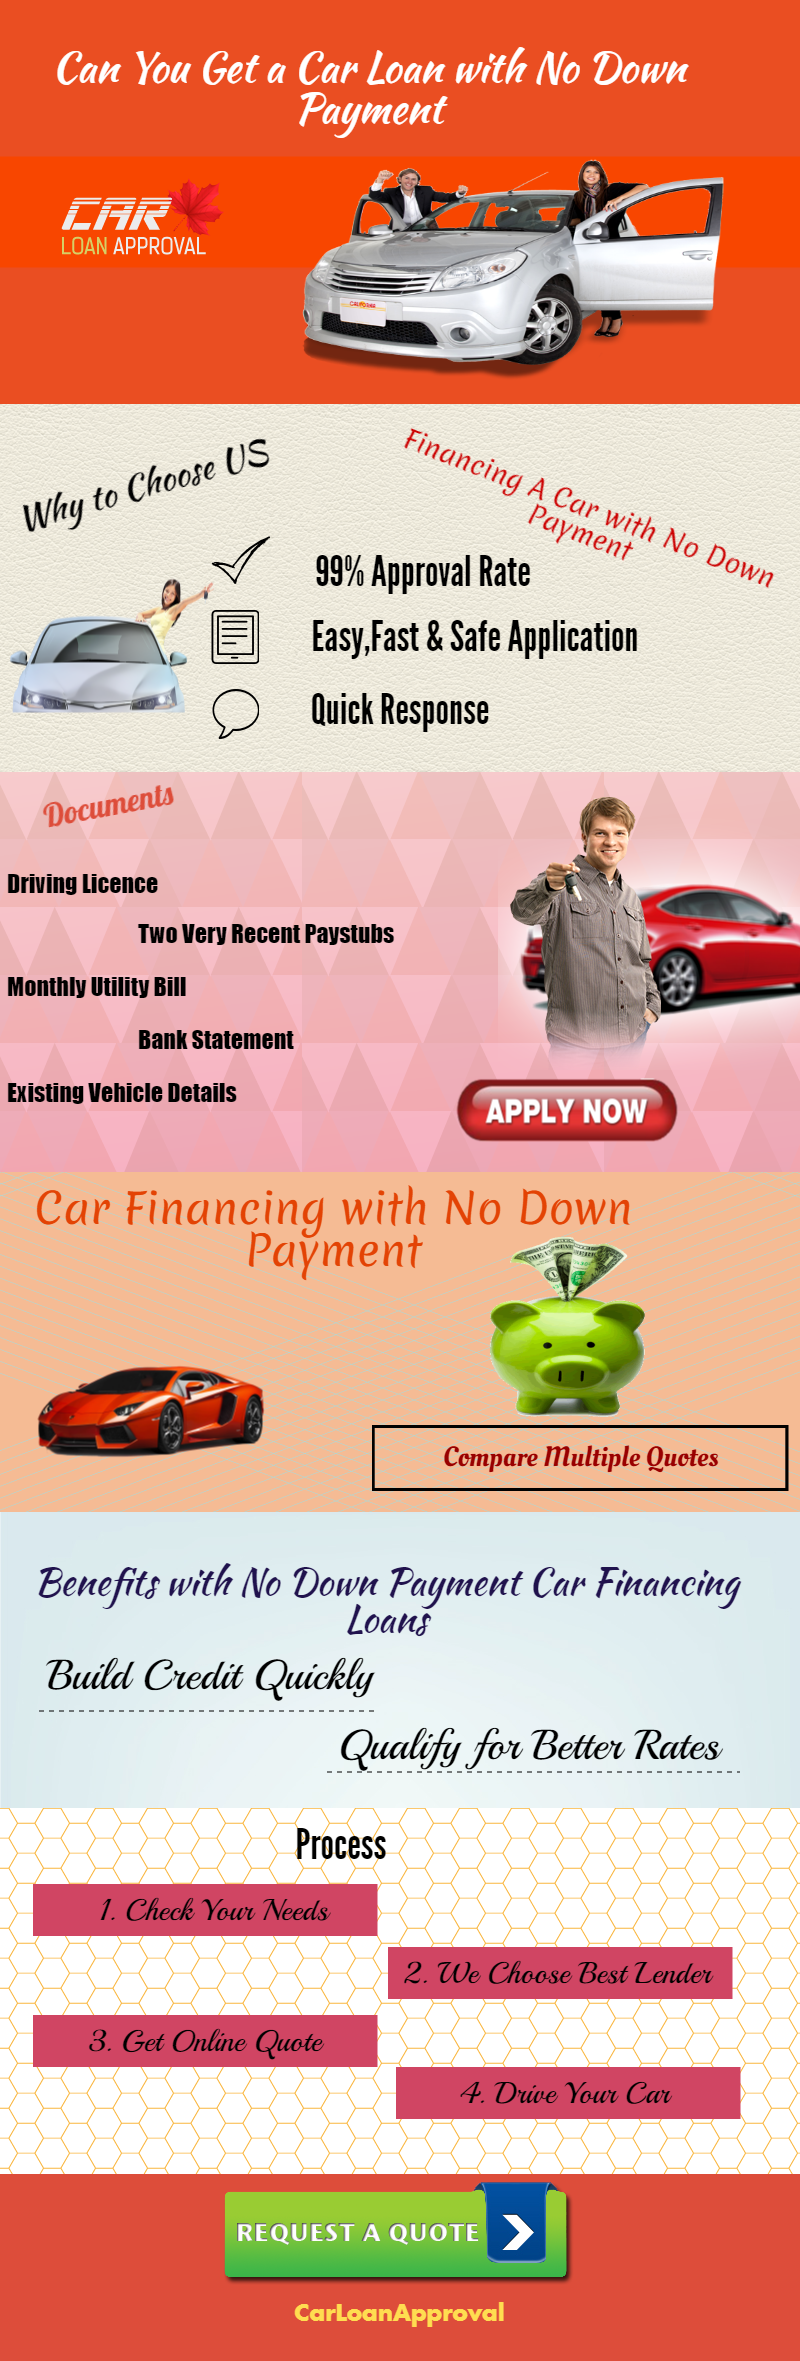 can you get a car loan with no down payment